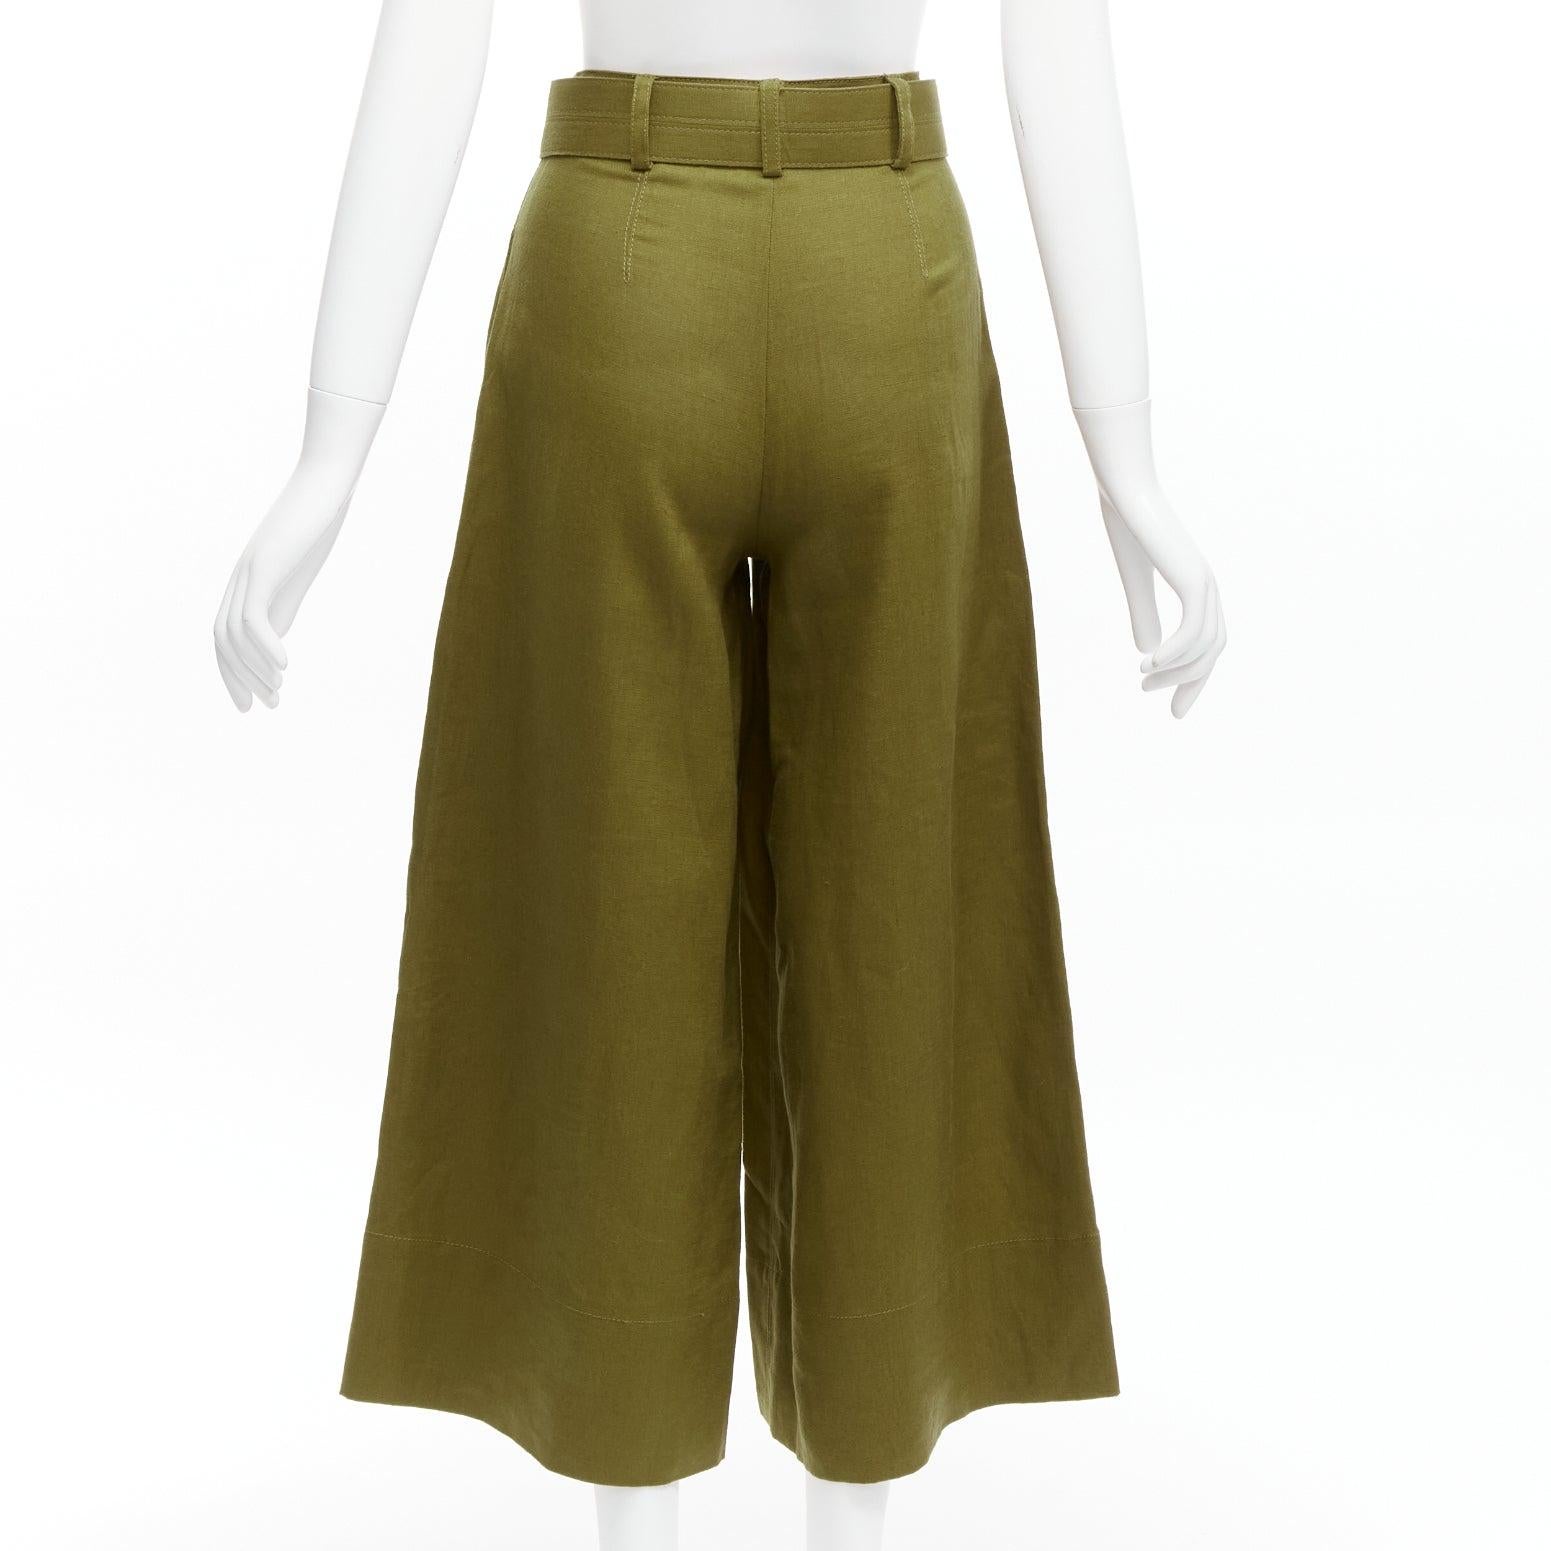 Women's NICHOLAS military green 100% linen high waisted belted wide leg pants US6 M For Sale